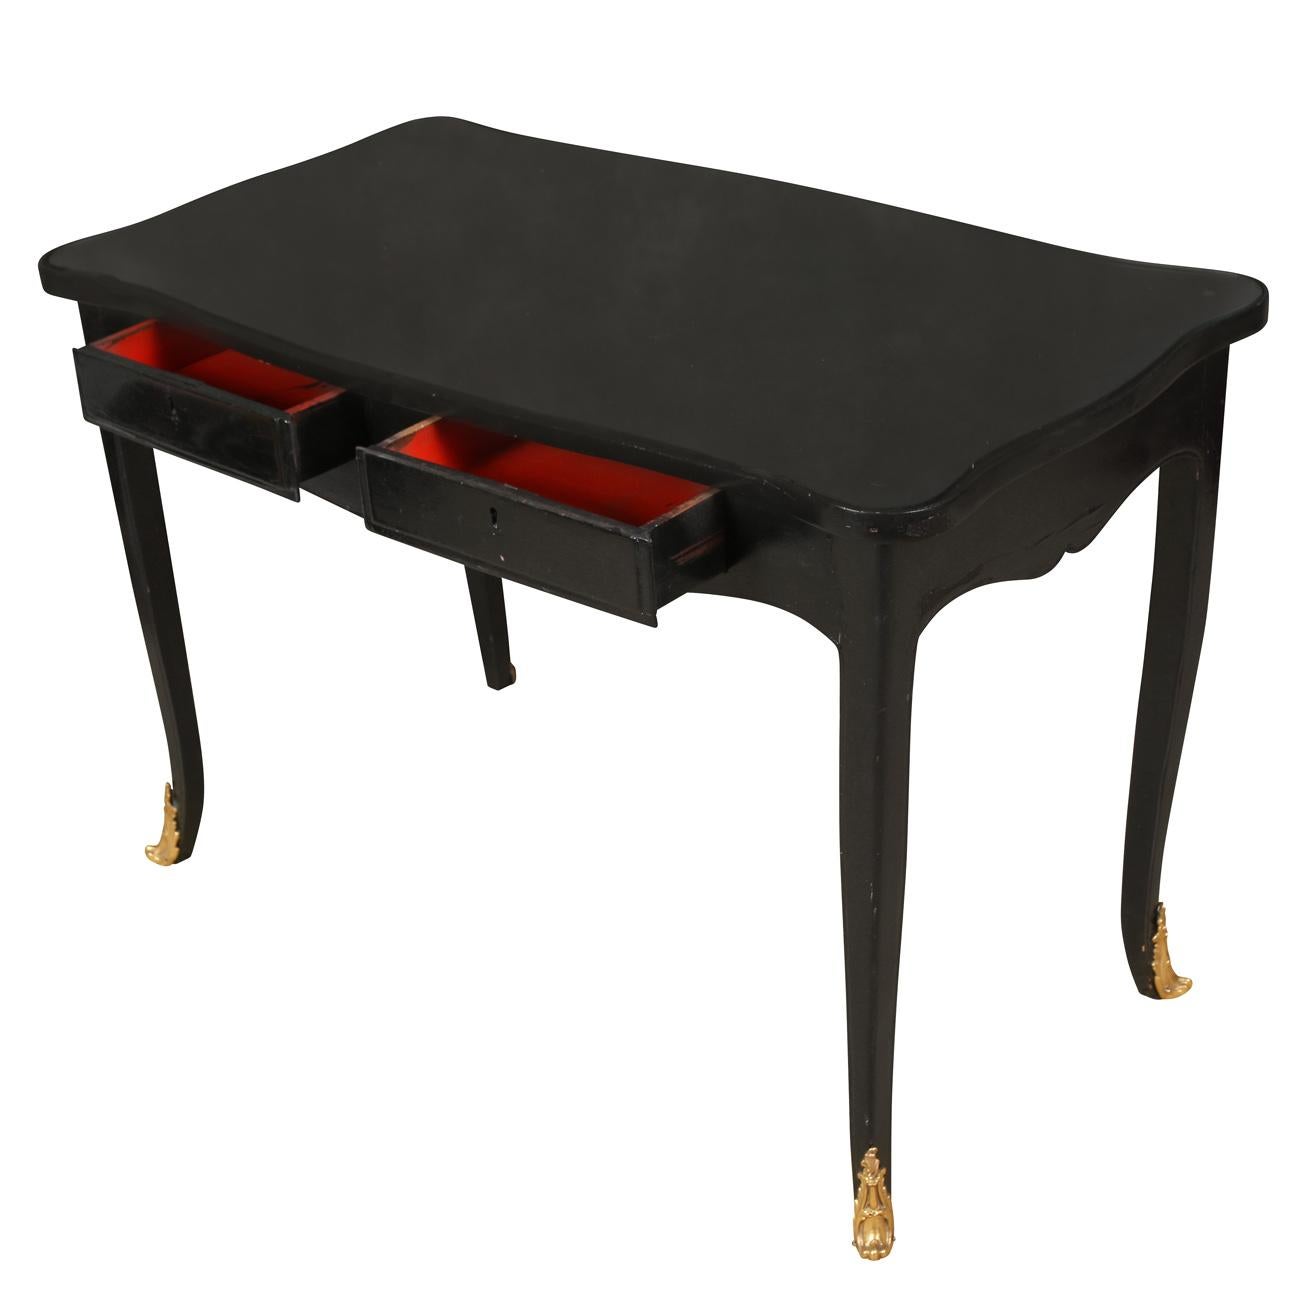 An ebonized writing desk in Louis XV style with cabriole legs and ormolu mounts to the feet, two drawers, a curved apron and a glass top.